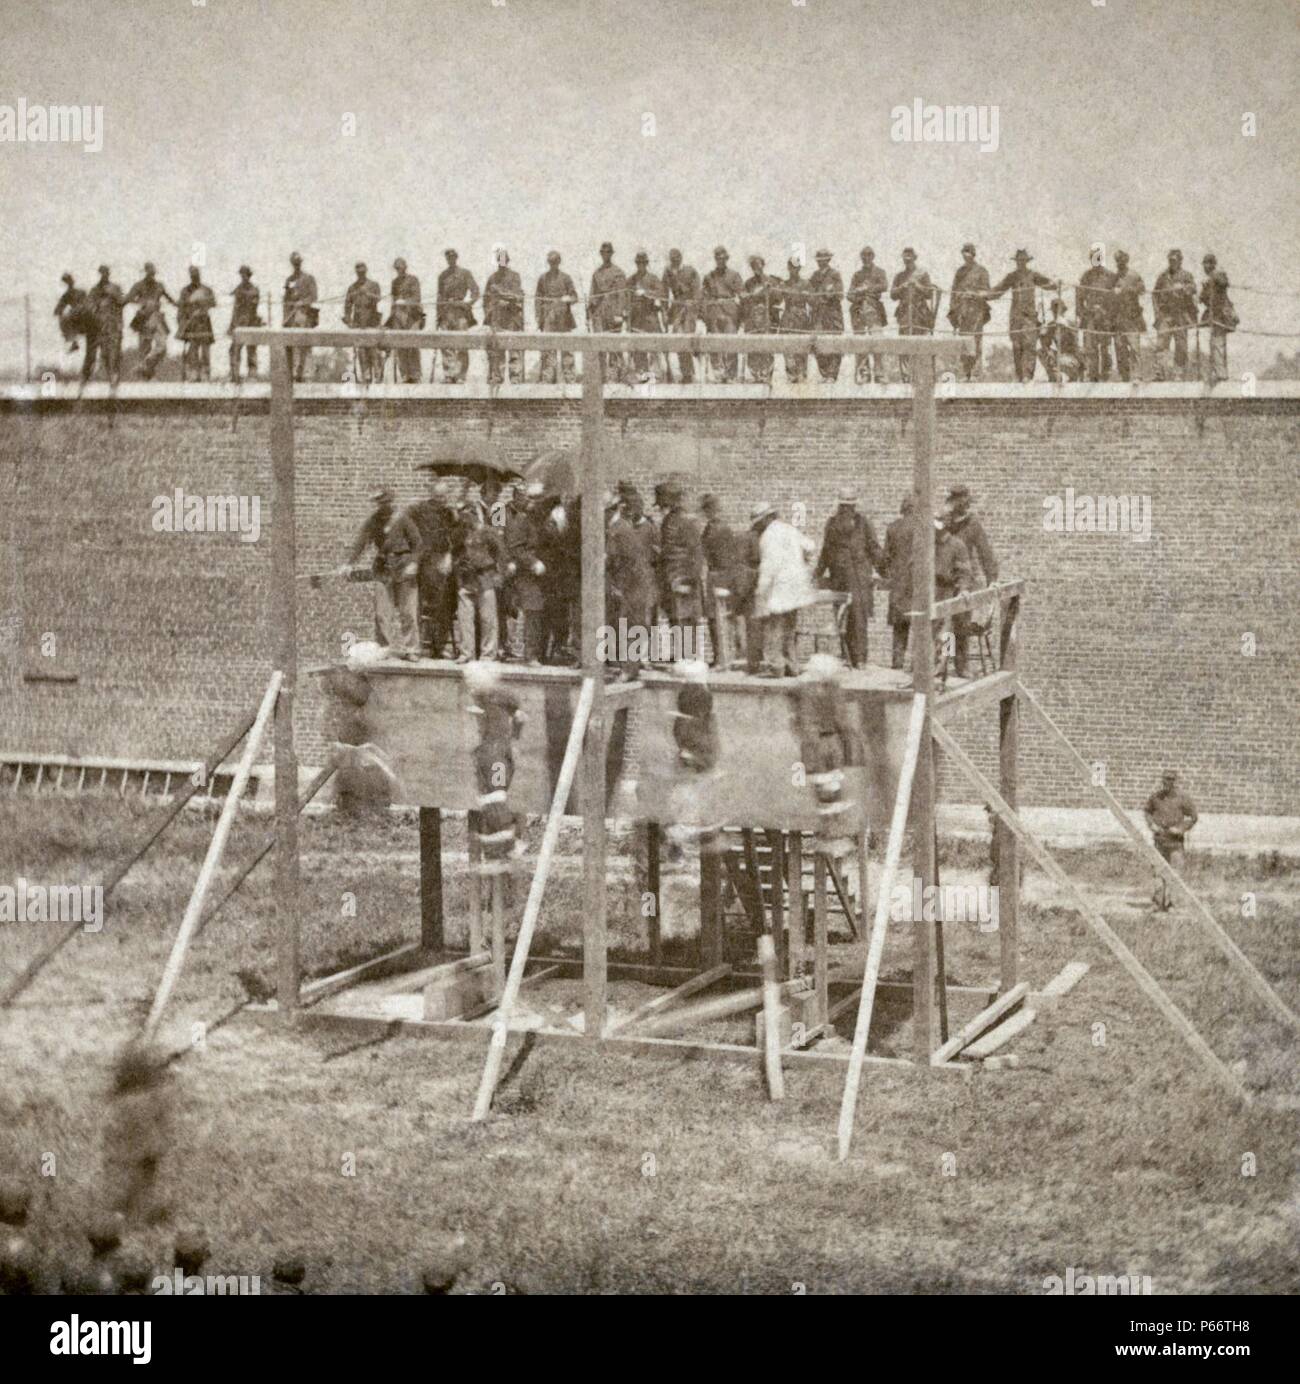 Execution of Mary Surratt, Lewis Powell, David Herold, and George Atzerodt, conspirators of Abraham Lincoln assassination, on July 7, 1865 at Fort McNair in Washington, D.C. Stock Photo